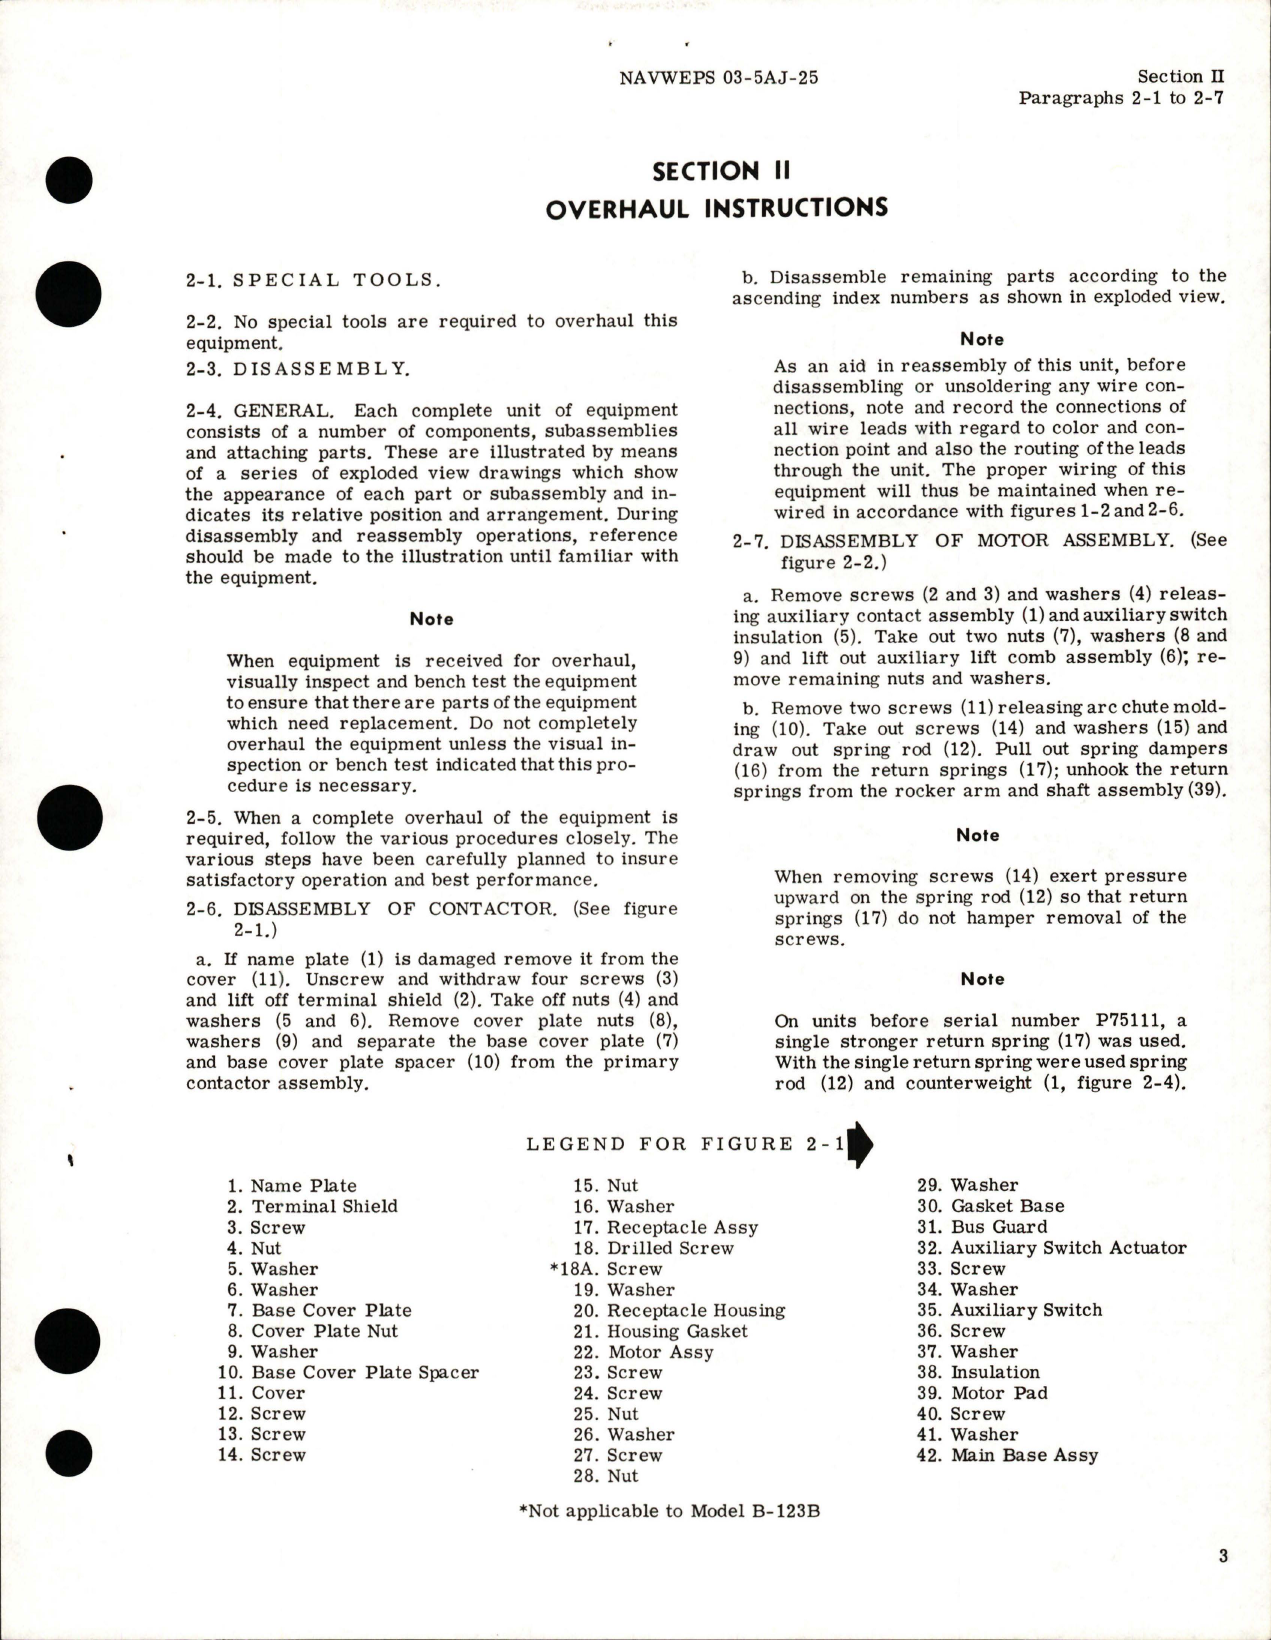 Sample page 7 from AirCorps Library document: Overhaul Instructions for Contractor - Models B-123B and B-123J 